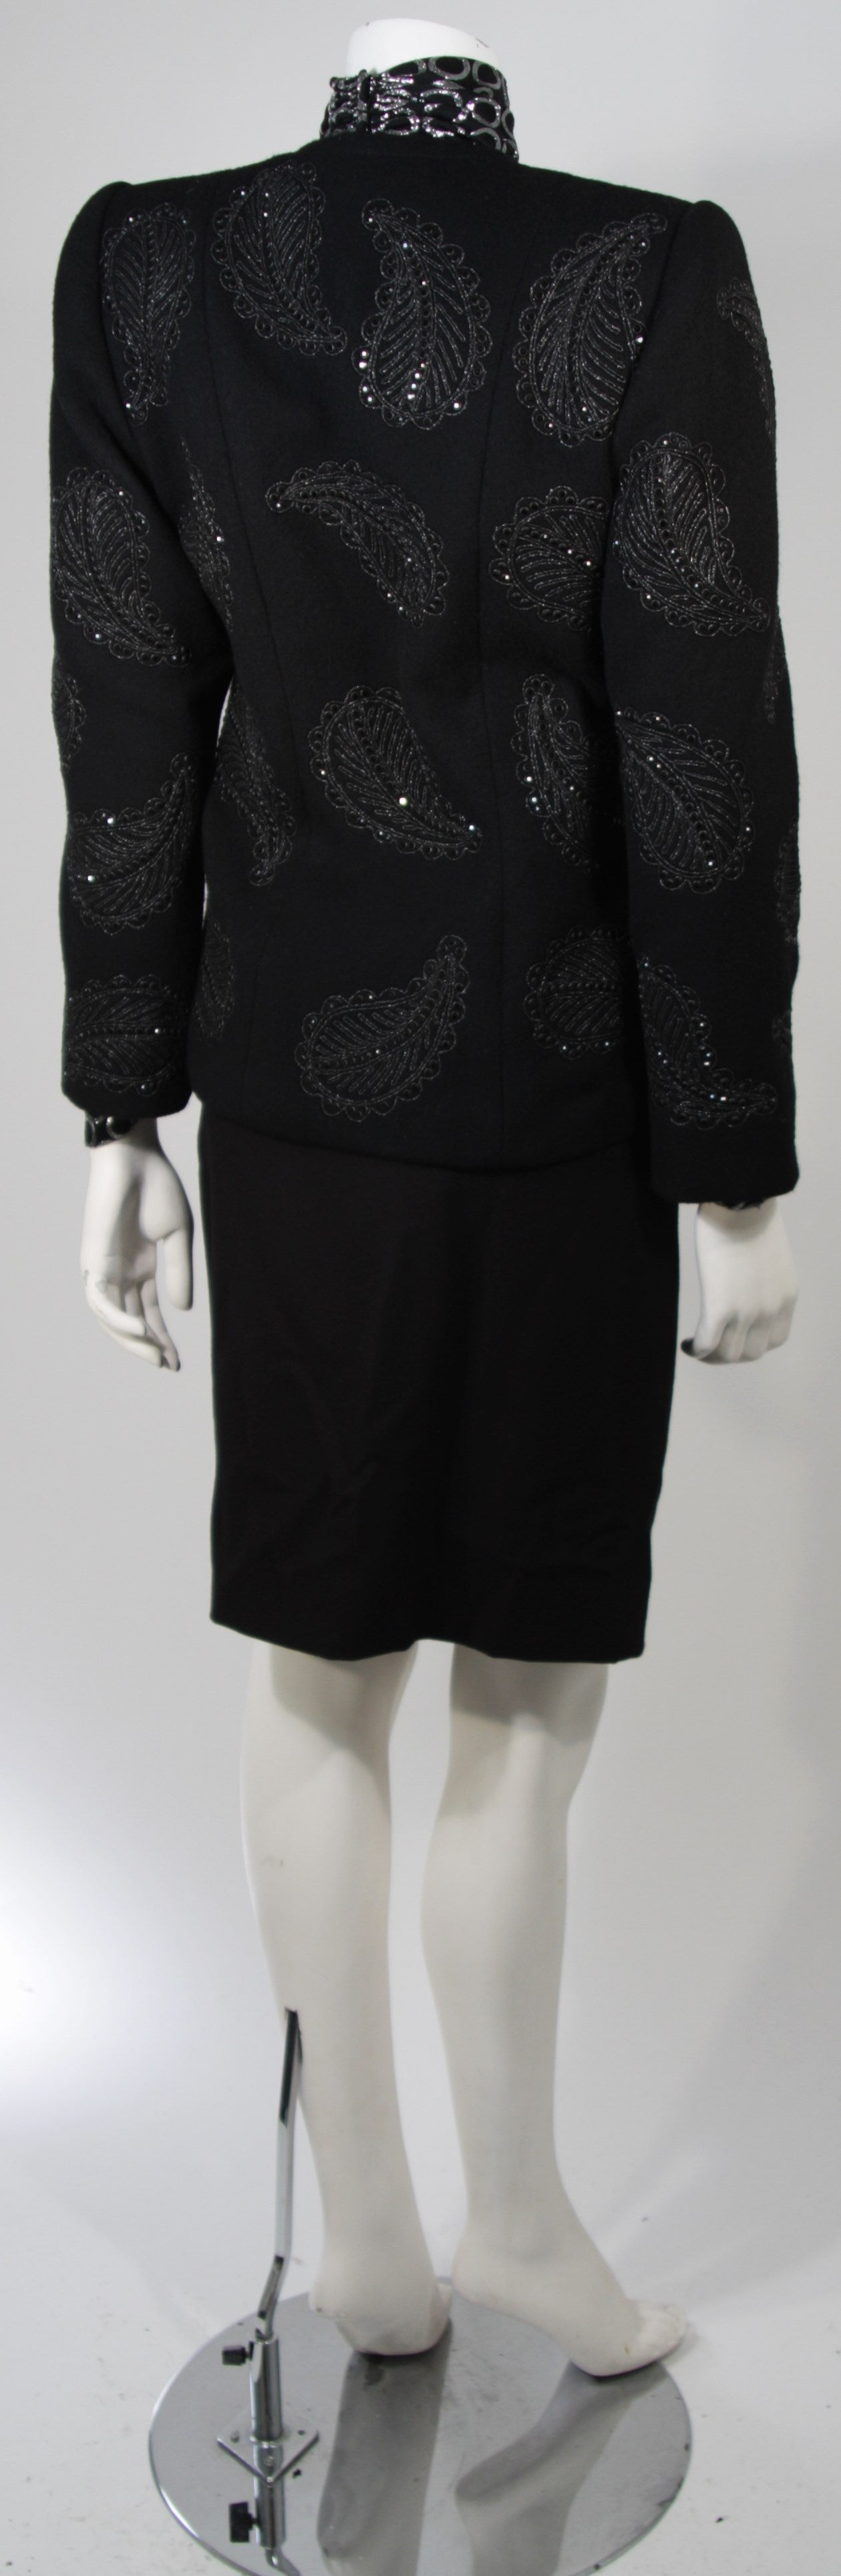 Galanos Black Wool Embroidered Jacket with Silk Metallic Blouse Skirt Size 2-4 2